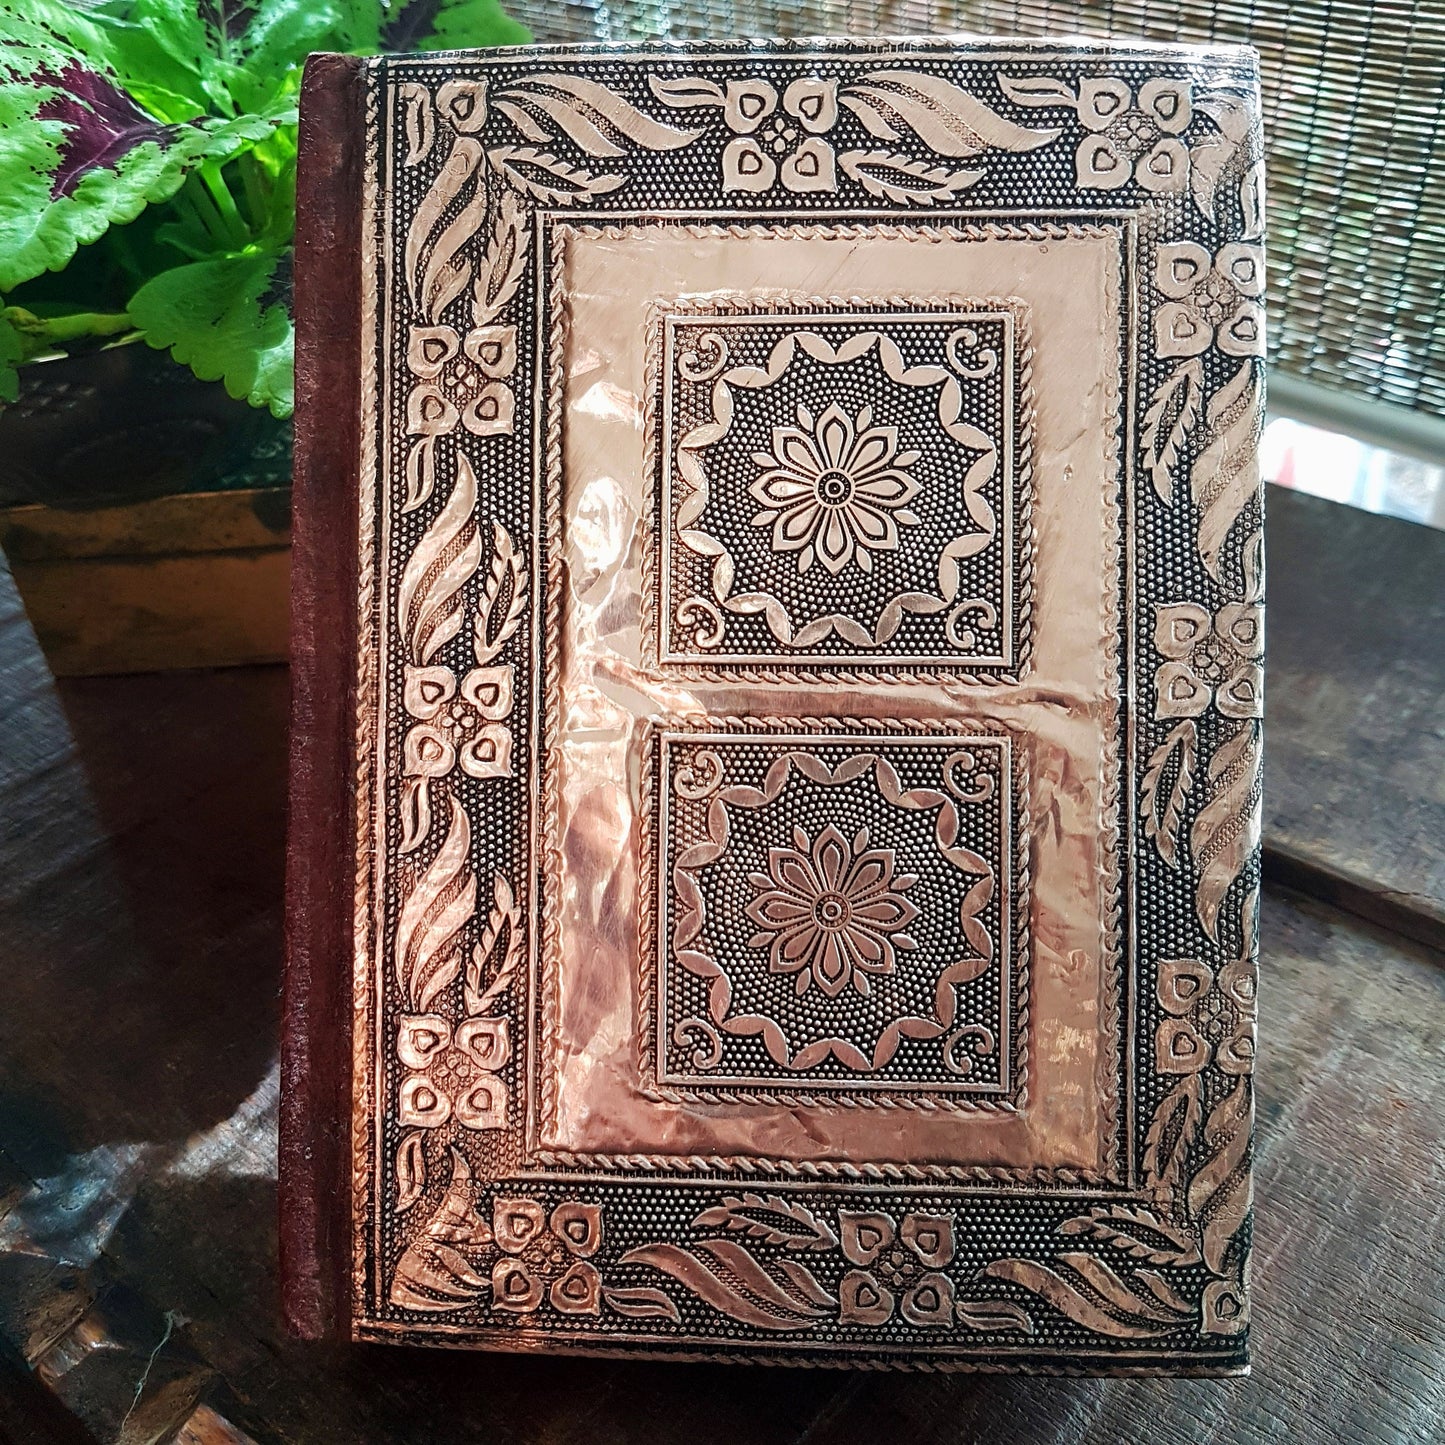 Journal notebook with medieval hardcover design 5x7 inch. Antique copper embossed cover. Use as sketchbook, bullet journal, personal diary. - Vintage India Ca